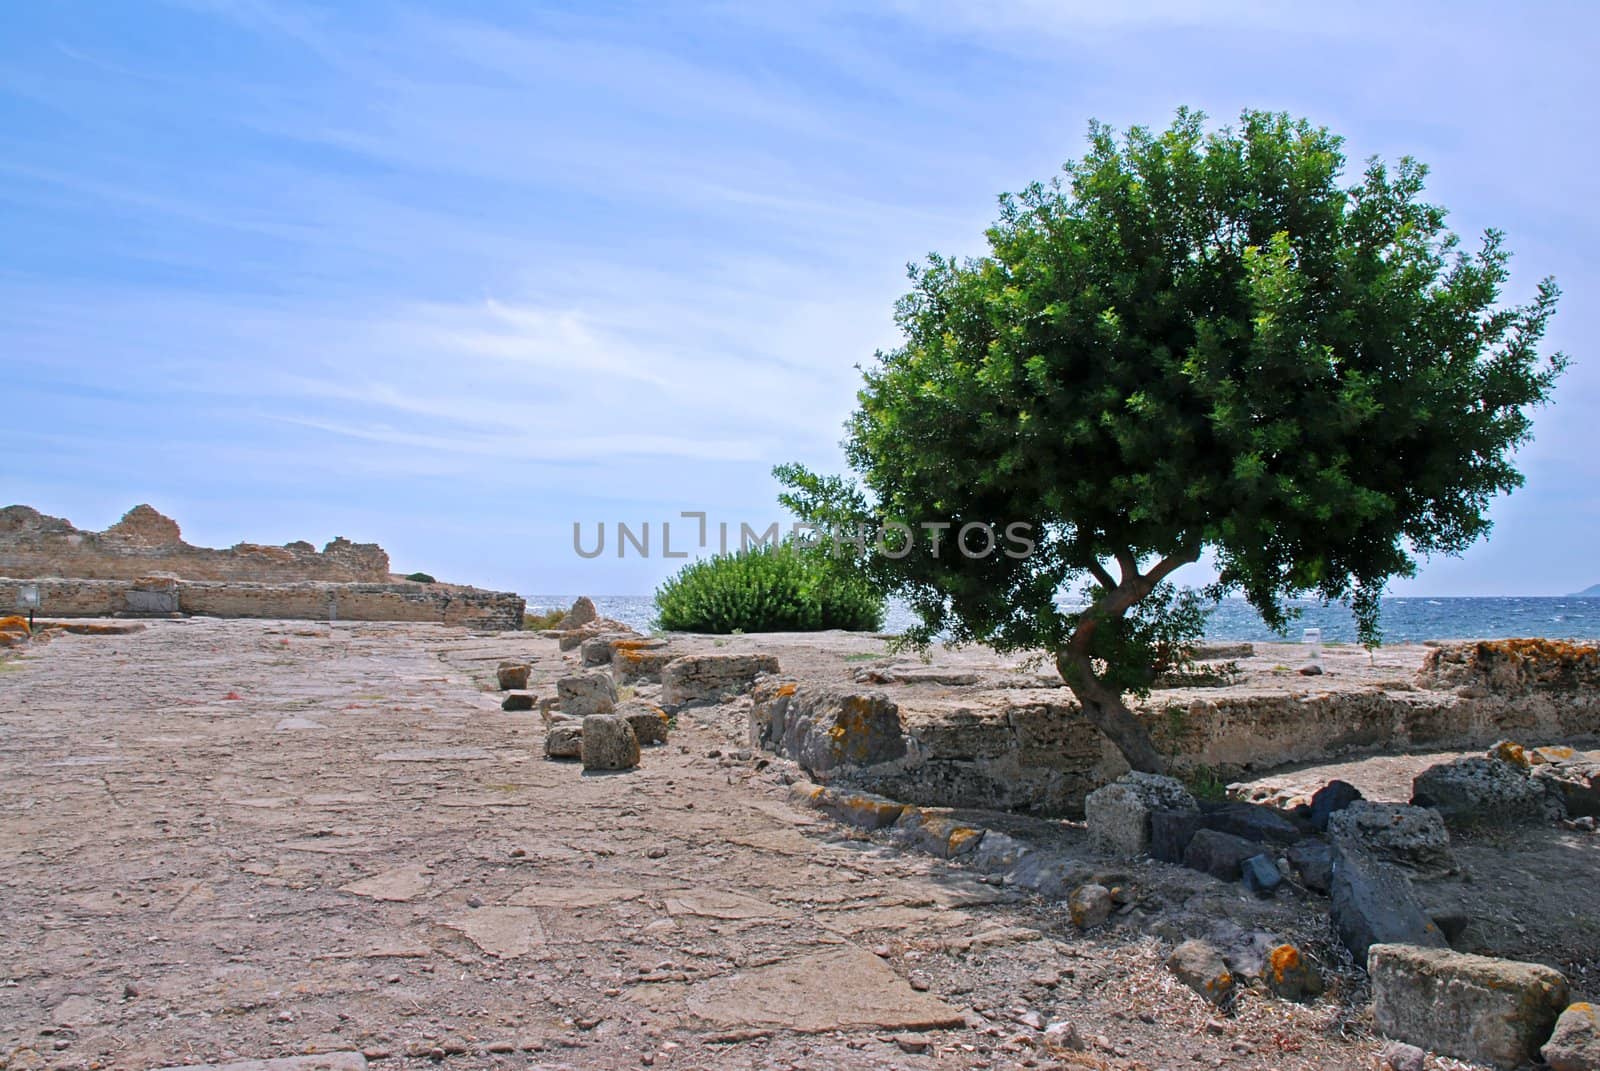 Ancient ruins of Pula in Italy with a olive tree and sea